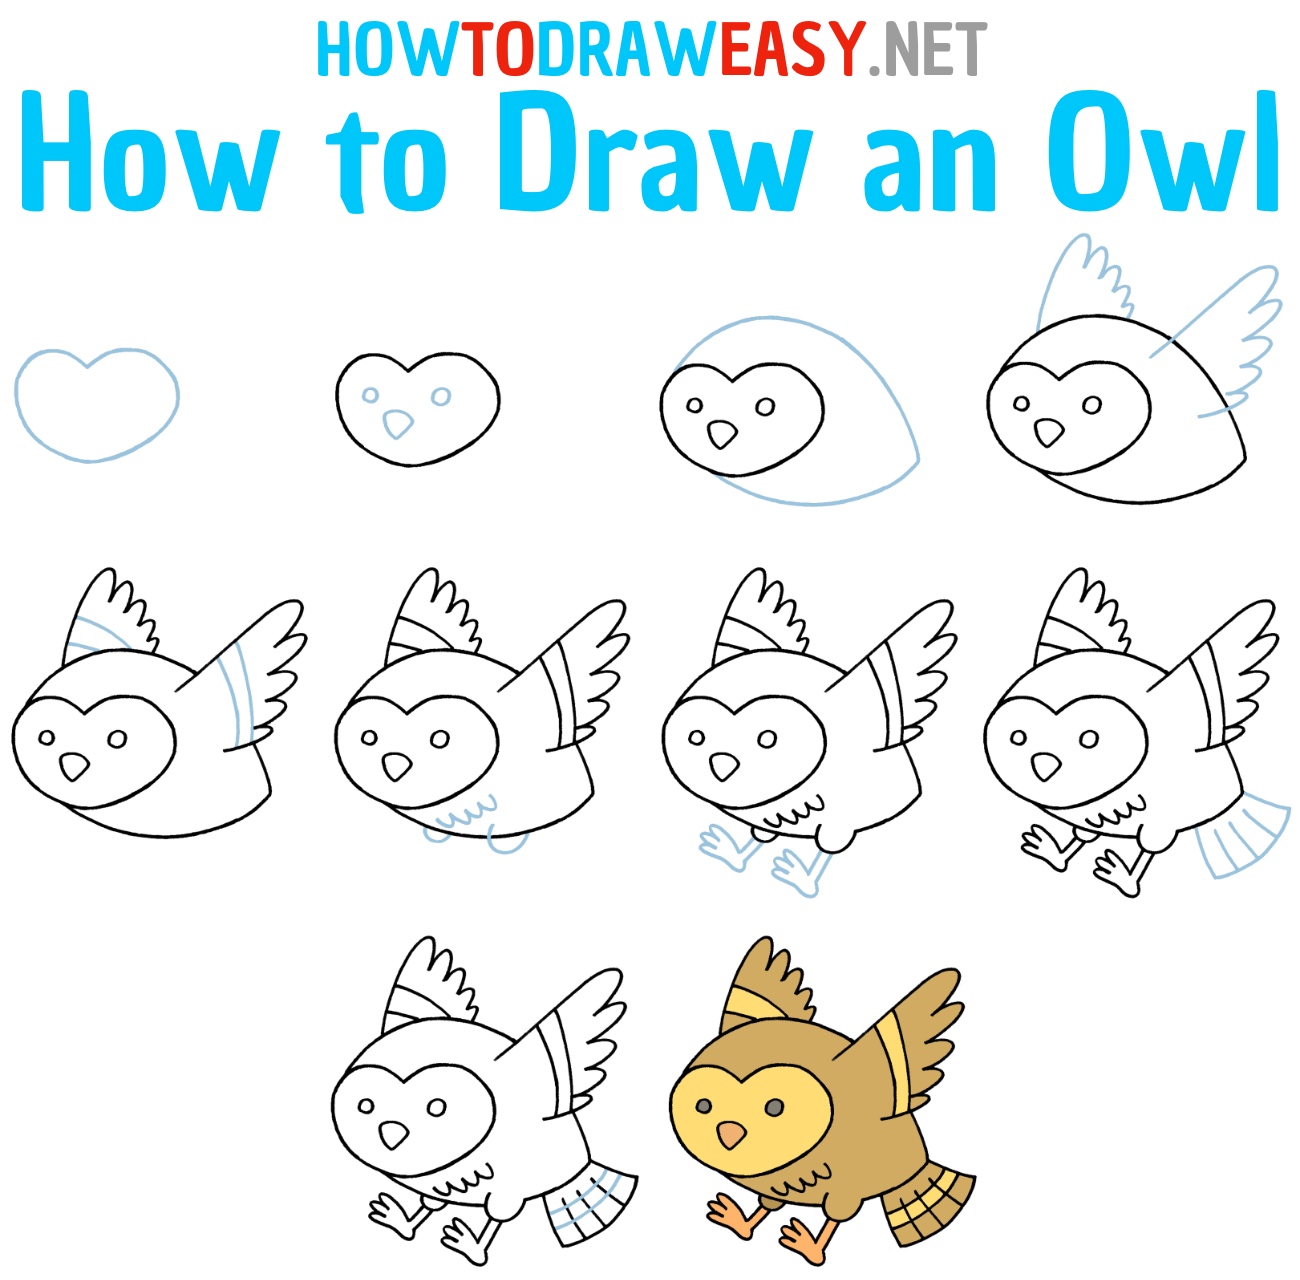 How to Draw an Owl Step by Step